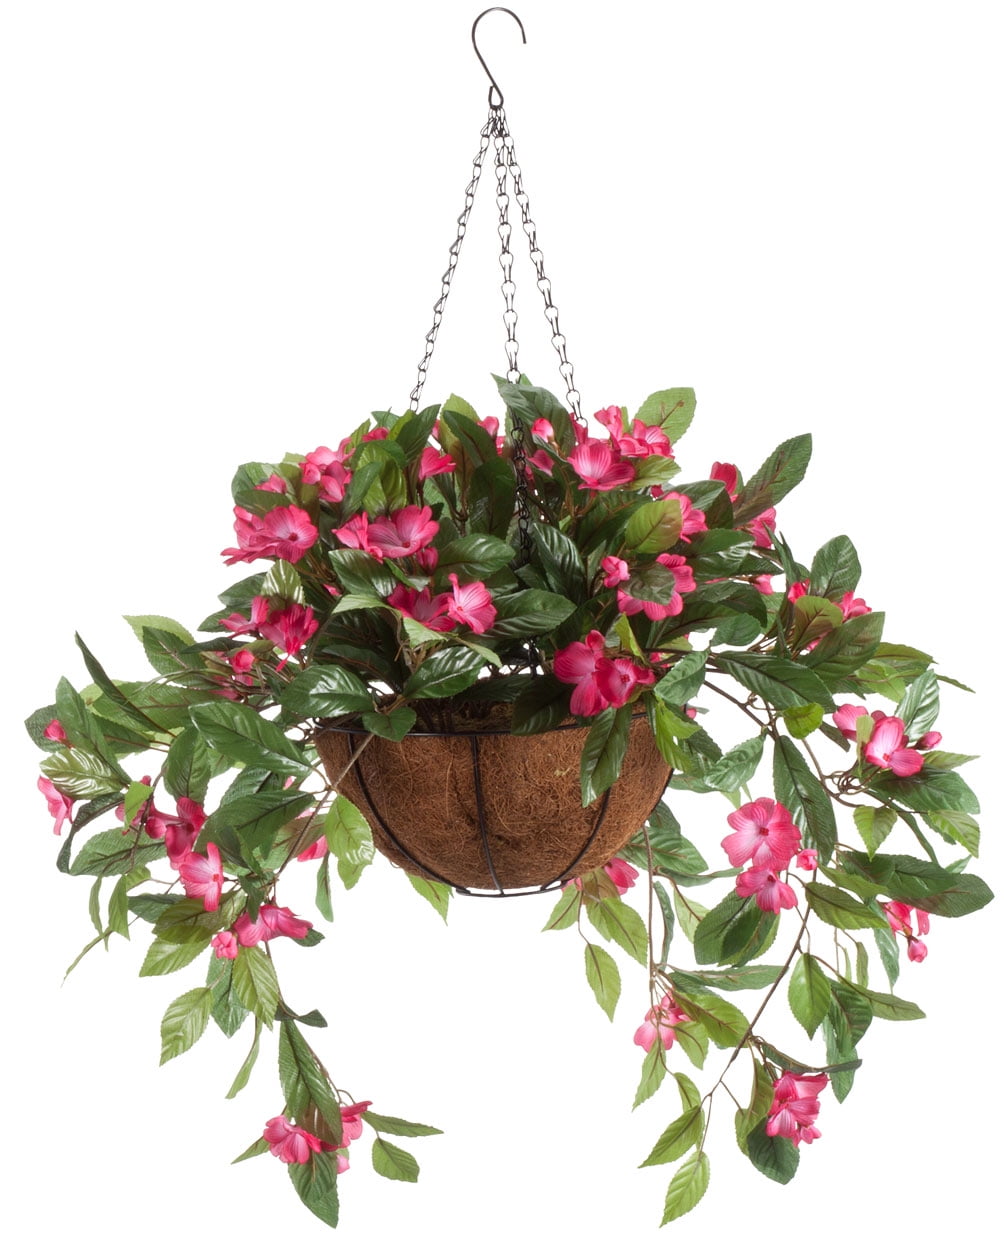 OakRidge Miles Kimball Fully Assembled Artificial Begonia Hanging Basket 10” Diameter and 18” Chain Coral Polyester/Plastic Flowers in Metal and Coco Fiber Liner Basket for Indoor/Outdoor Use 